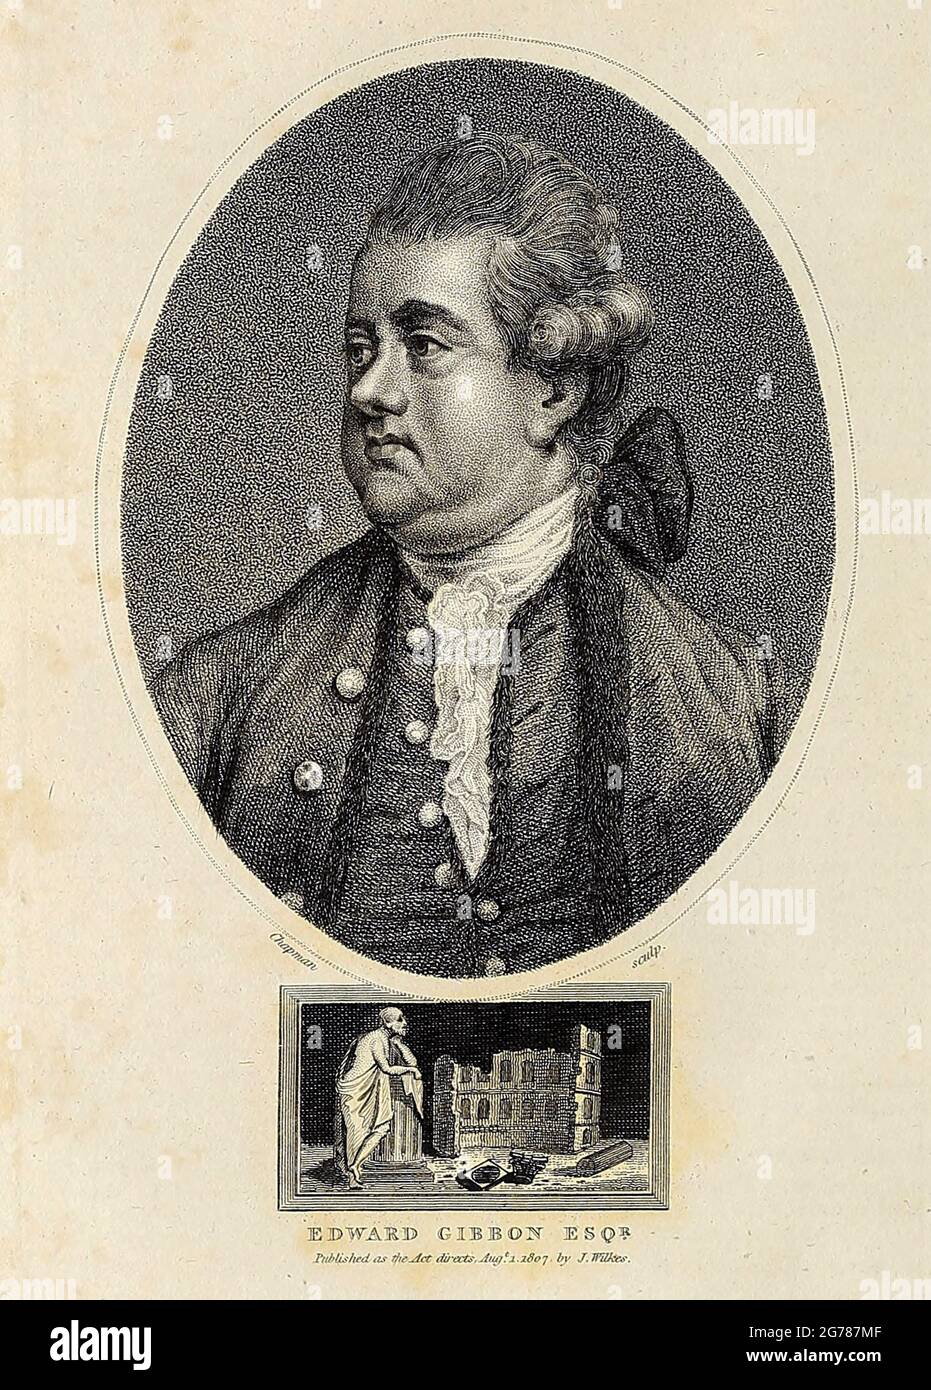 Edward Gibbon FRS (8 May 1737 – 16 January 1794) was an English historian, writer, and Member of Parliament. His most important work, The History of the Decline and Fall of the Roman Empire, published in six volumes between 1776 and 1788, is known for the quality and irony of its prose, its use of primary sources, and its polemical criticism of organised religion. Copperplate engraving From the Encyclopaedia Londinensis or, Universal dictionary of arts, sciences, and literature; Volume VIII;  Edited by Wilkes, John. Published in London in 1810. Stock Photo